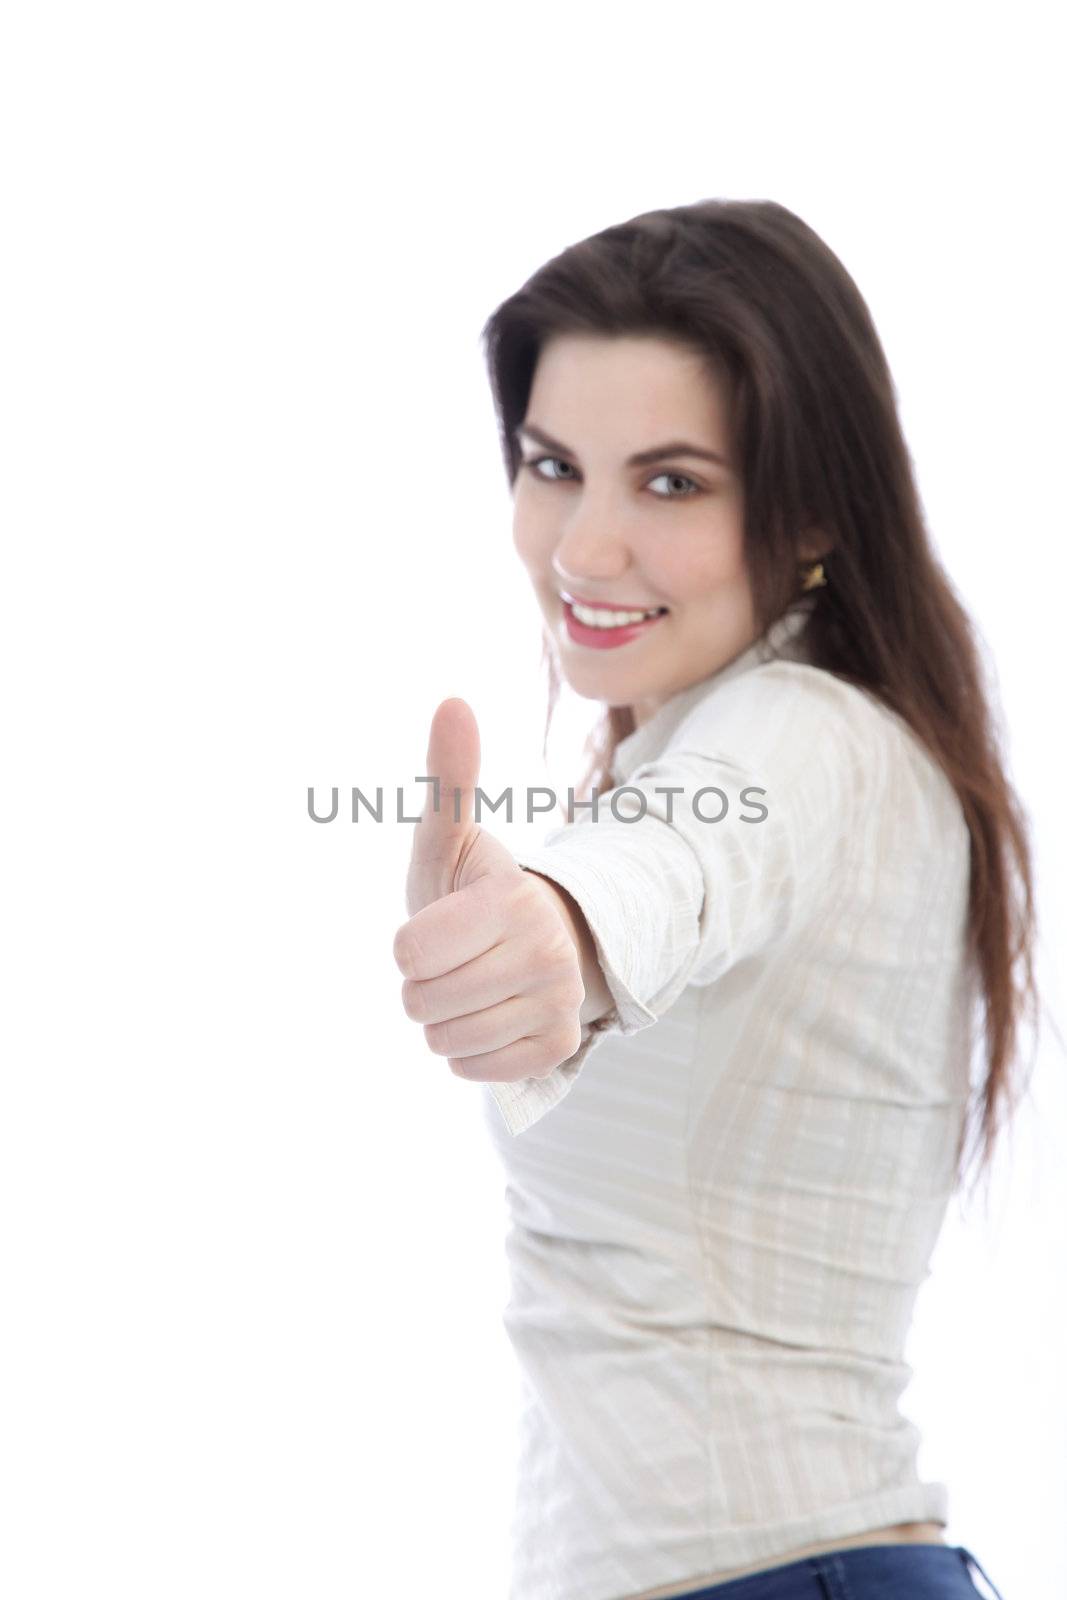 Smiling woman in a thumbs up portrait against the white background